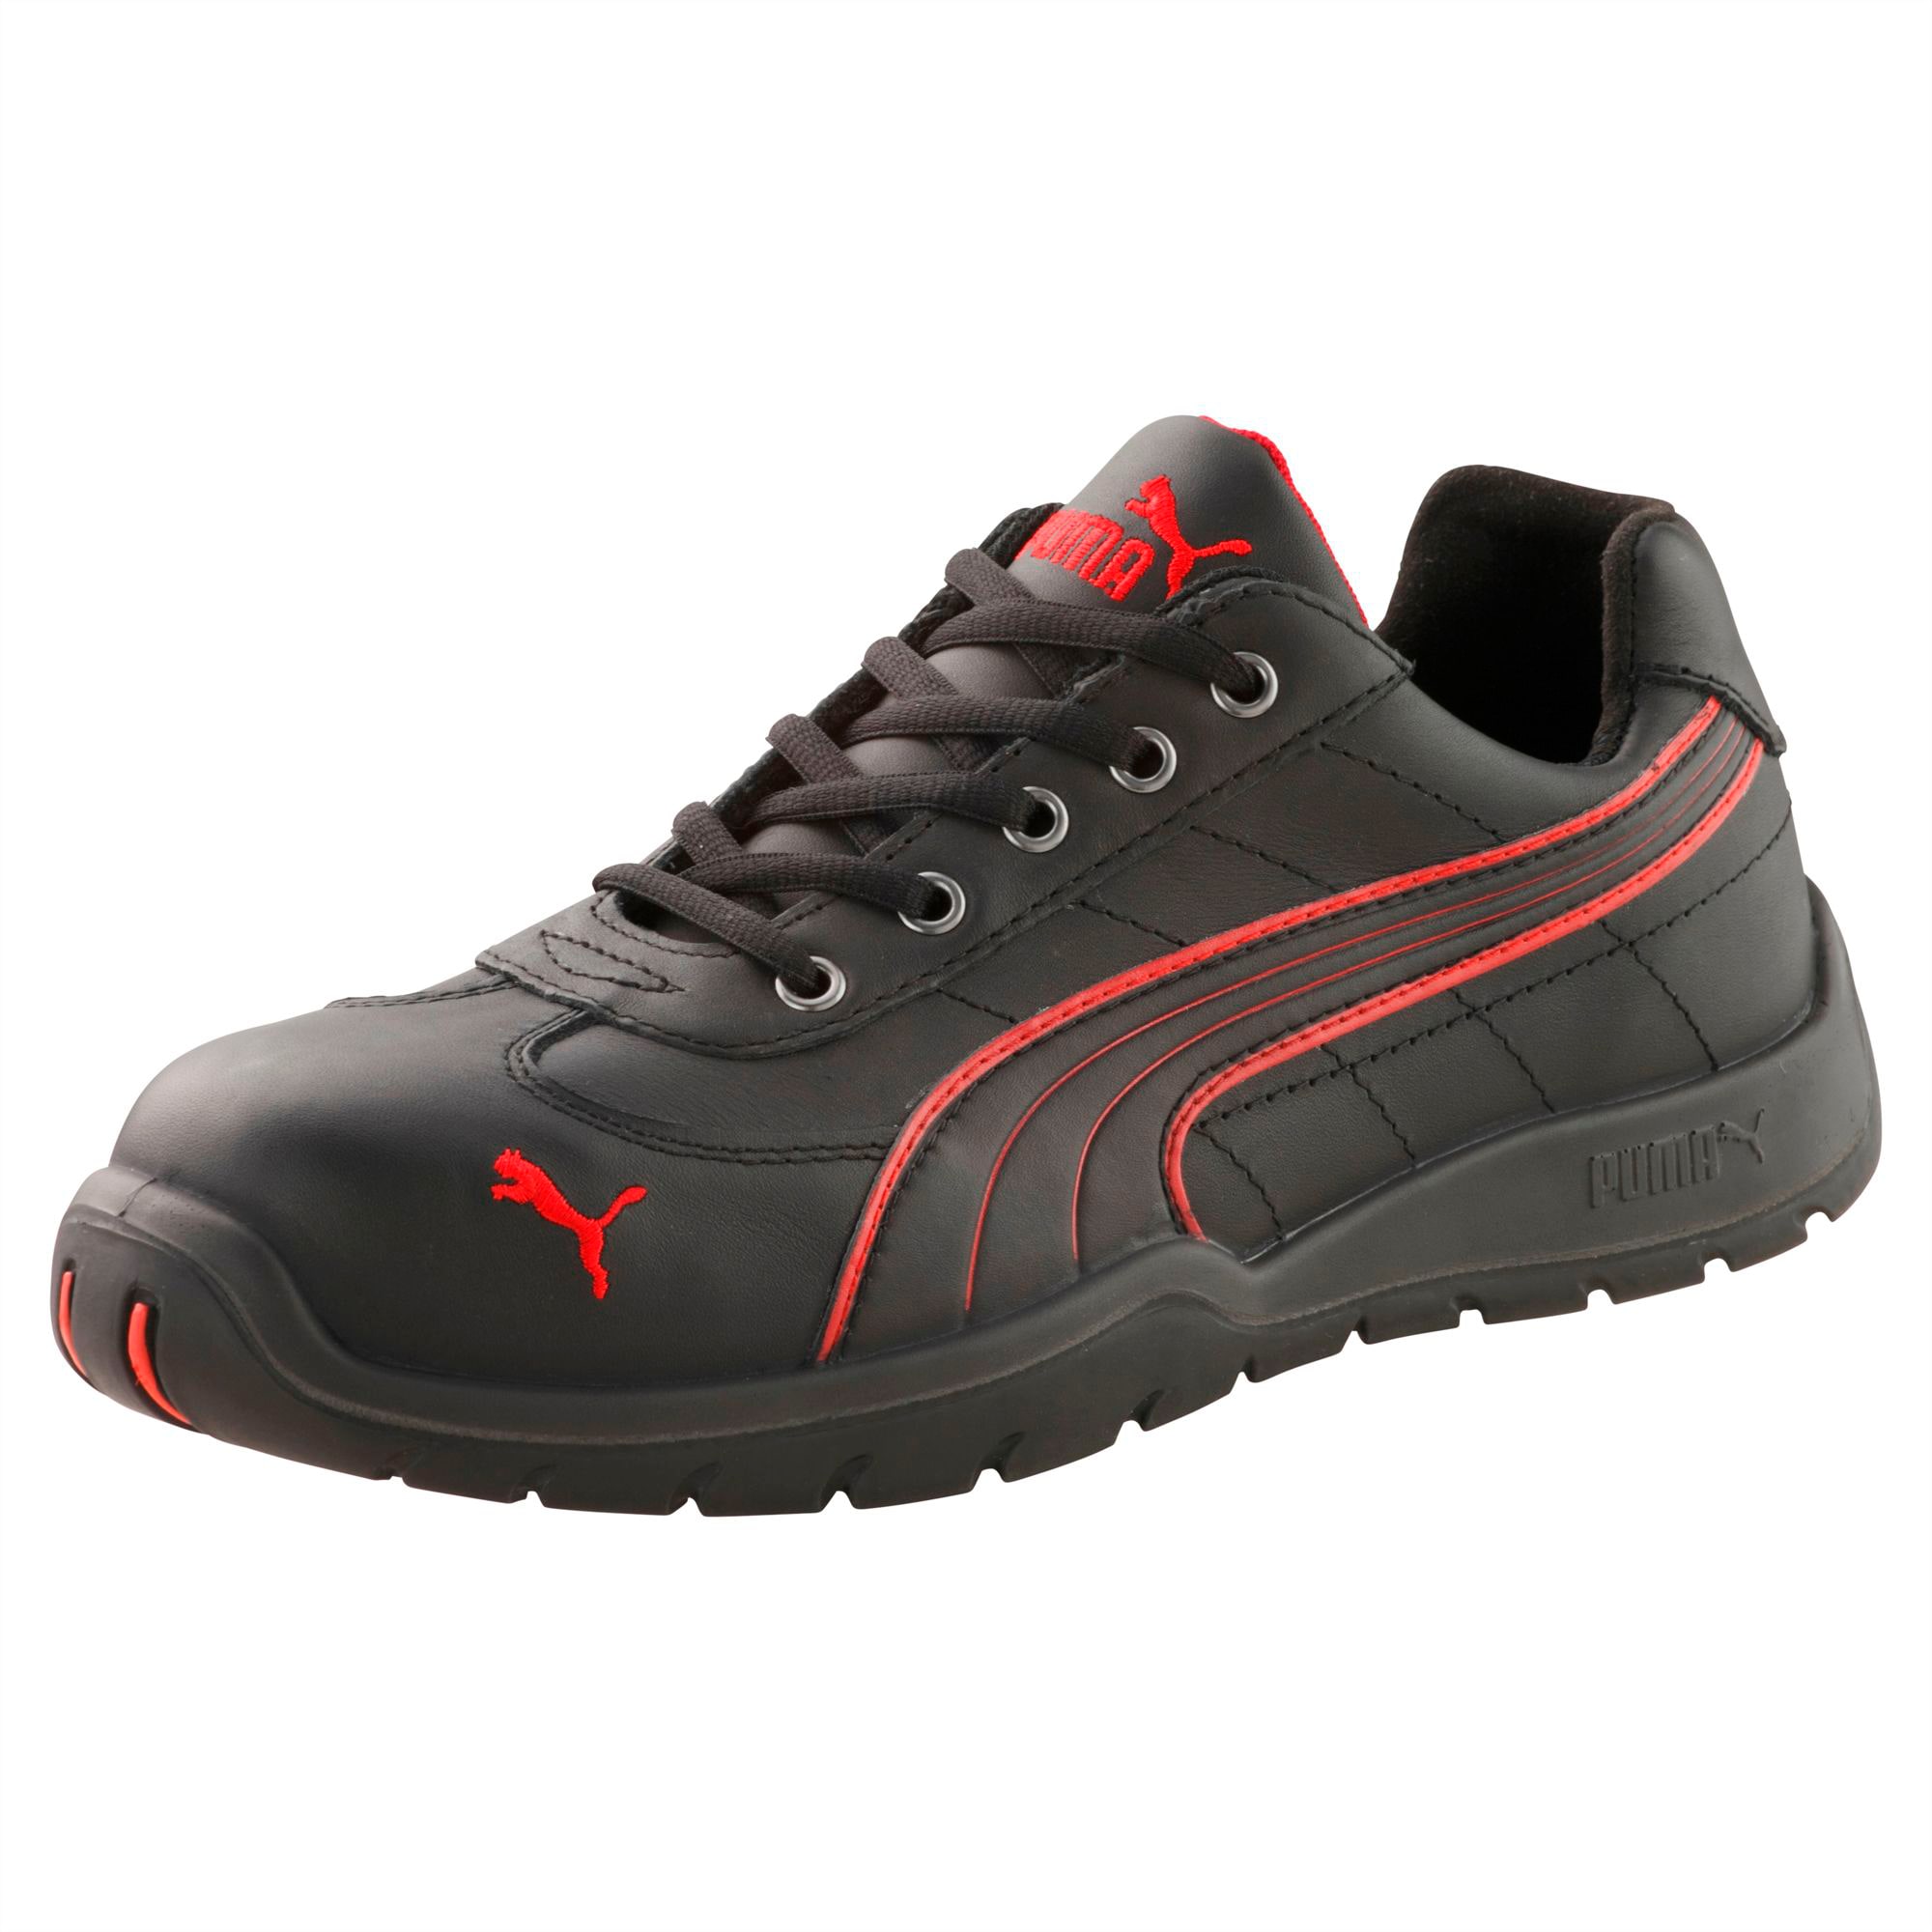 Puma Safety Shoes S3 | peacecommission.kdsg.gov.ng